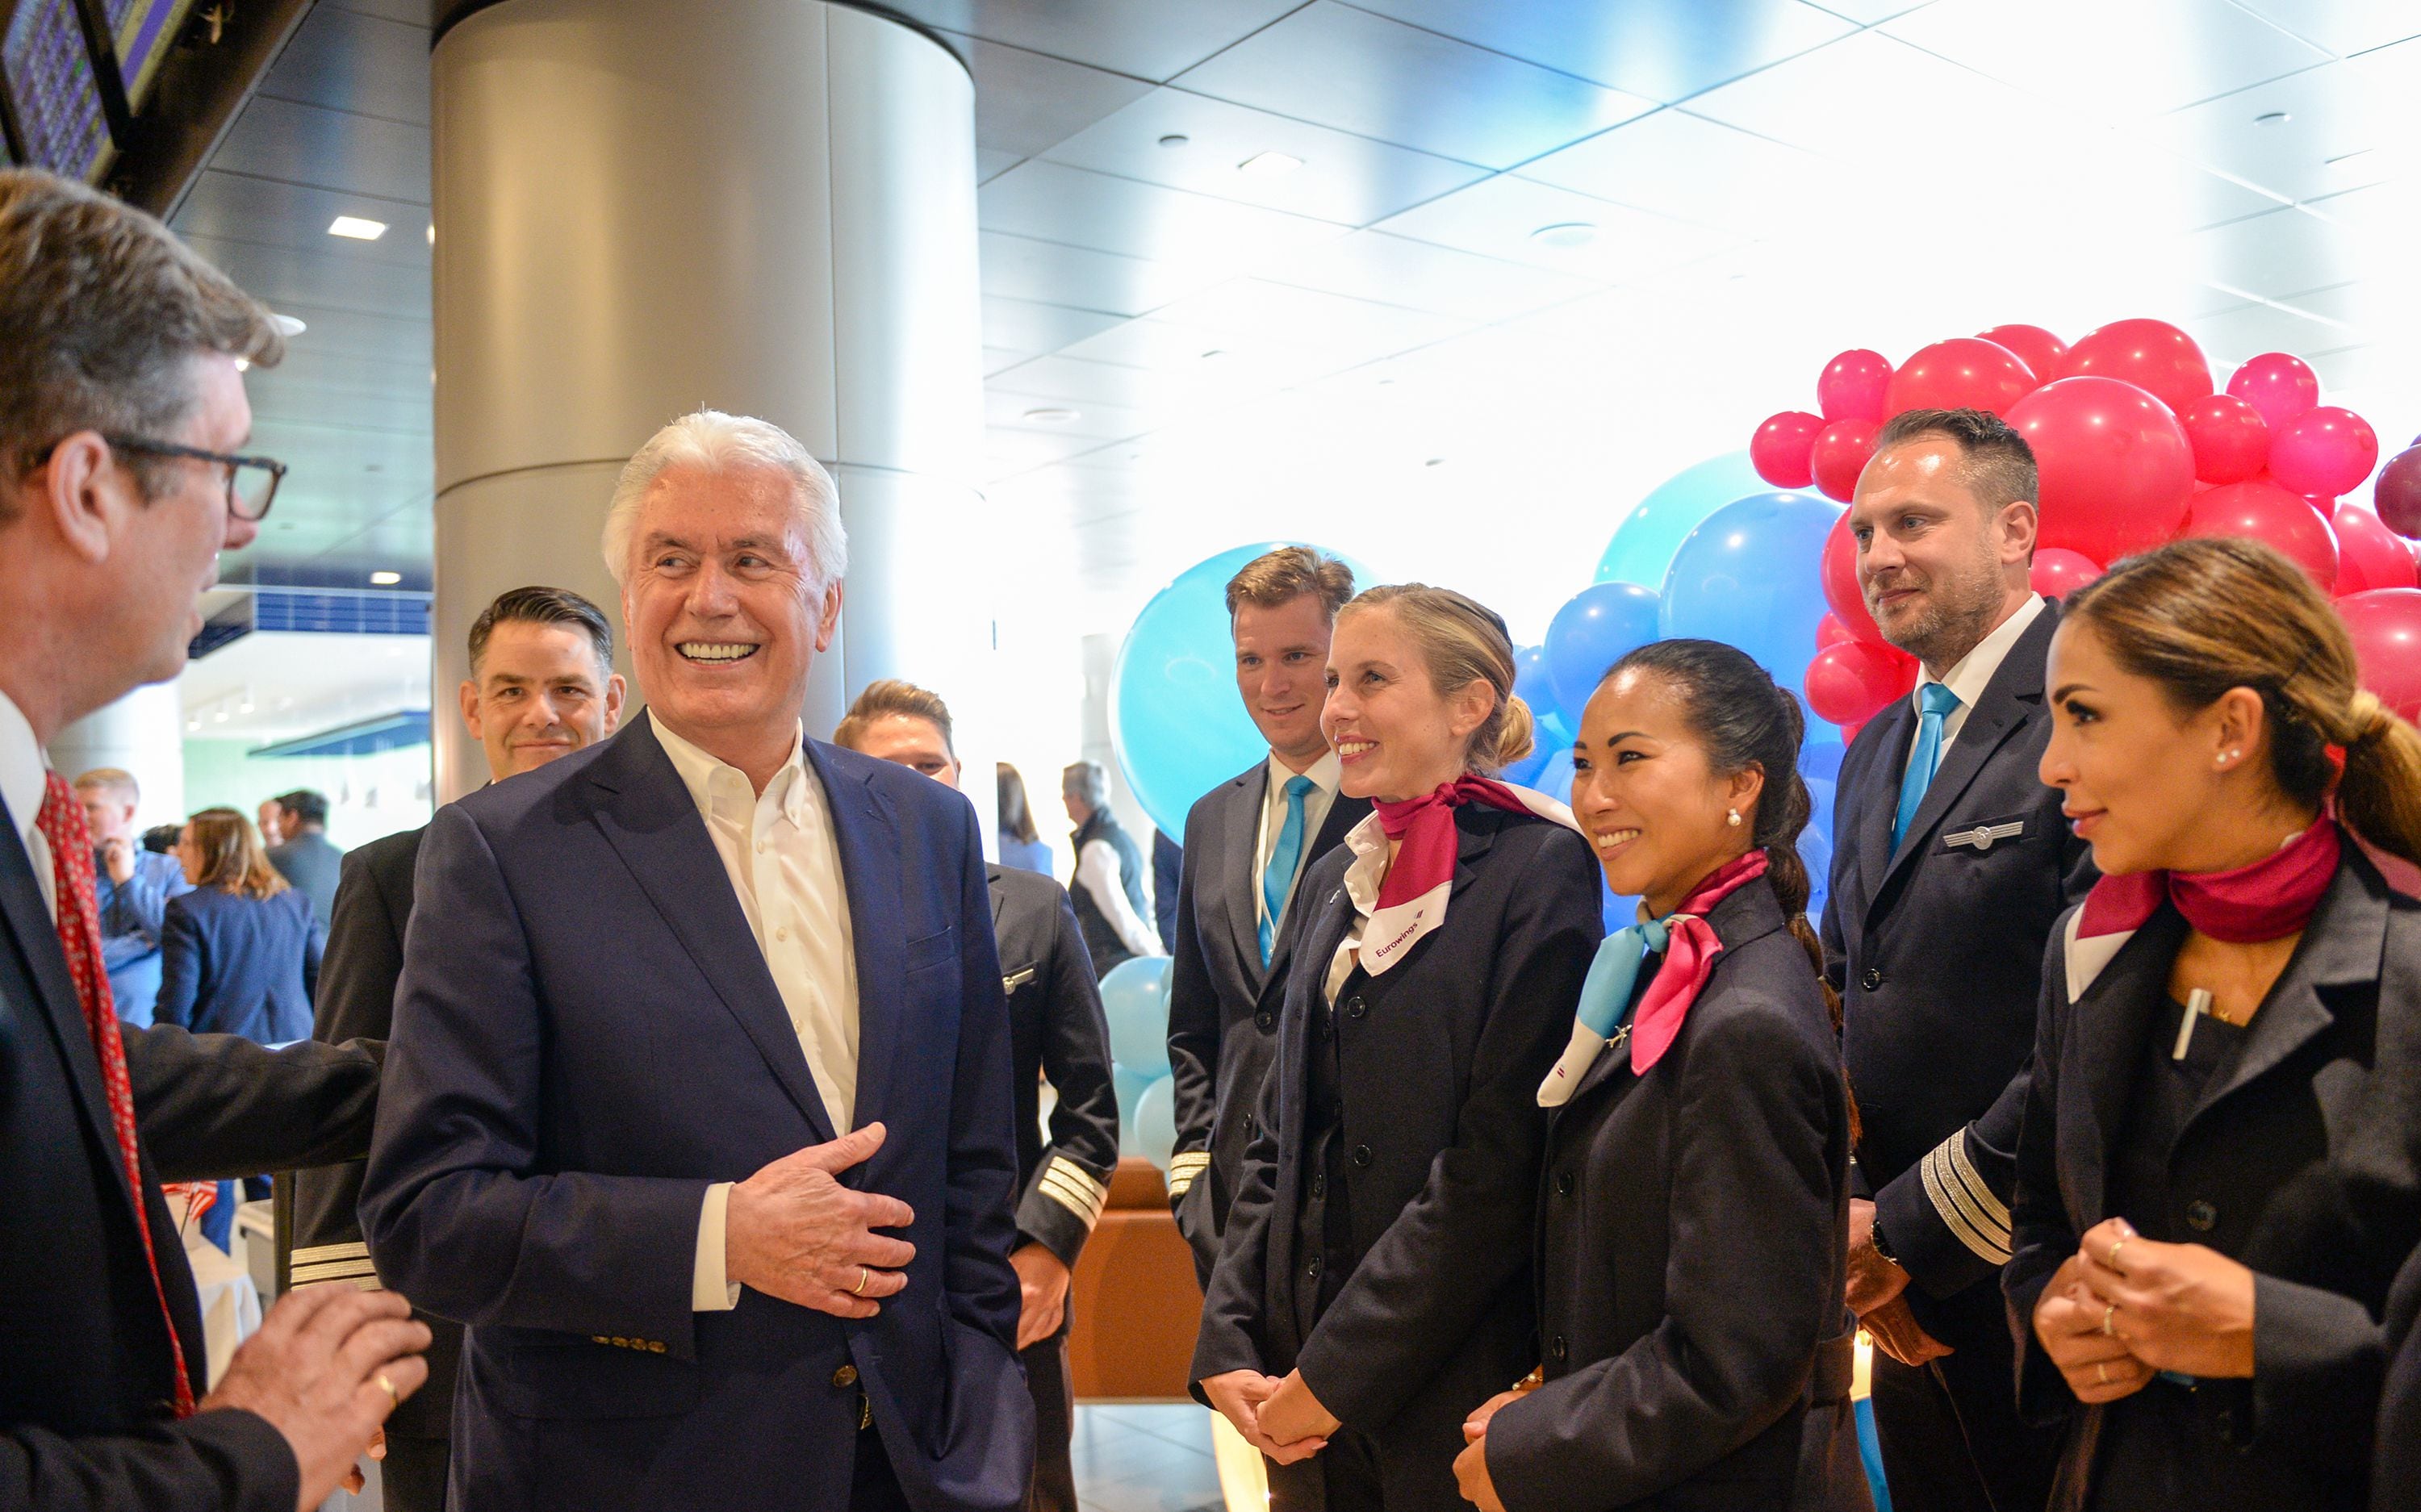 (Chris Samuels | The Salt Lake Tribune) Latter-day Saint apostle Dieter F. Uchtdorf, a former airline pilot and executive, greets the Eurowings Discover flight crew after arriving at Salt Lake City International Airport in 2022, the first nonstop flight from Frankfurt, Germany.